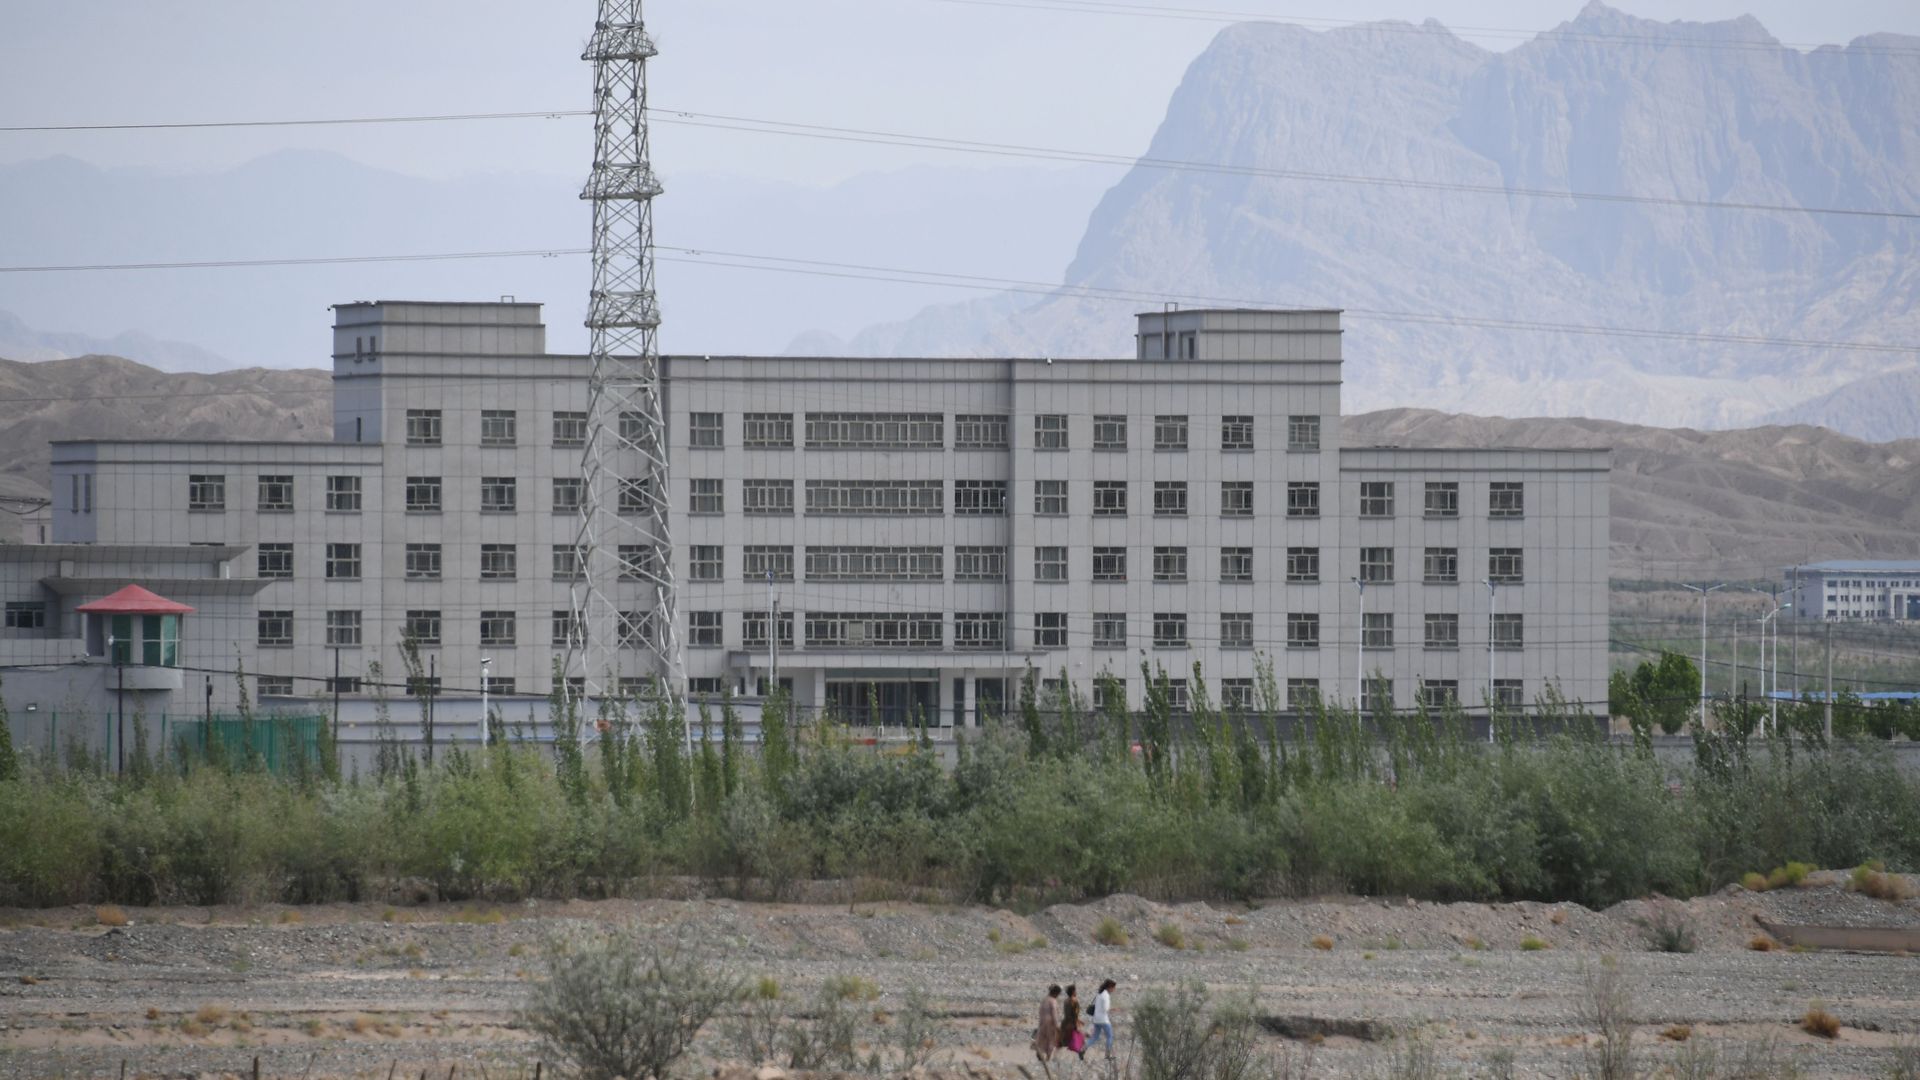 This photo taken on June 2, 2019 shows a facility believed to be a re-education camp where mostly Muslim ethnic minorities are detained, in Artux, north of Kashgar in China's western Xinjiang region. 